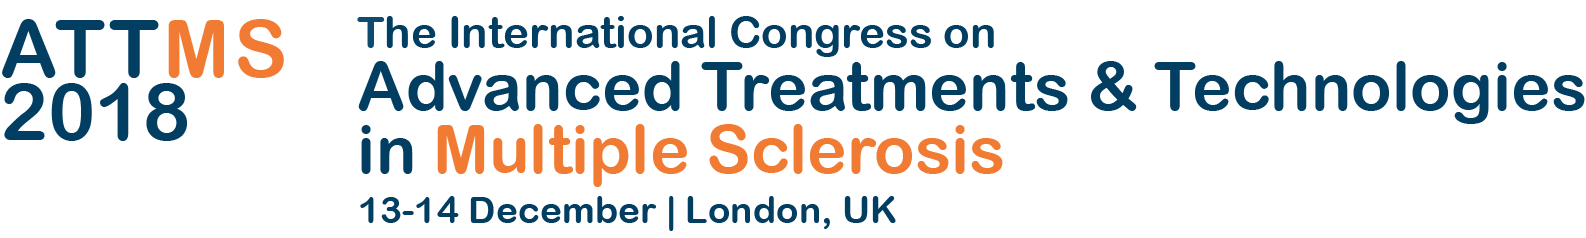  The International Congress on Advanced Treatments & Technologies in Multiple Sclerosis (ATTMS2018)